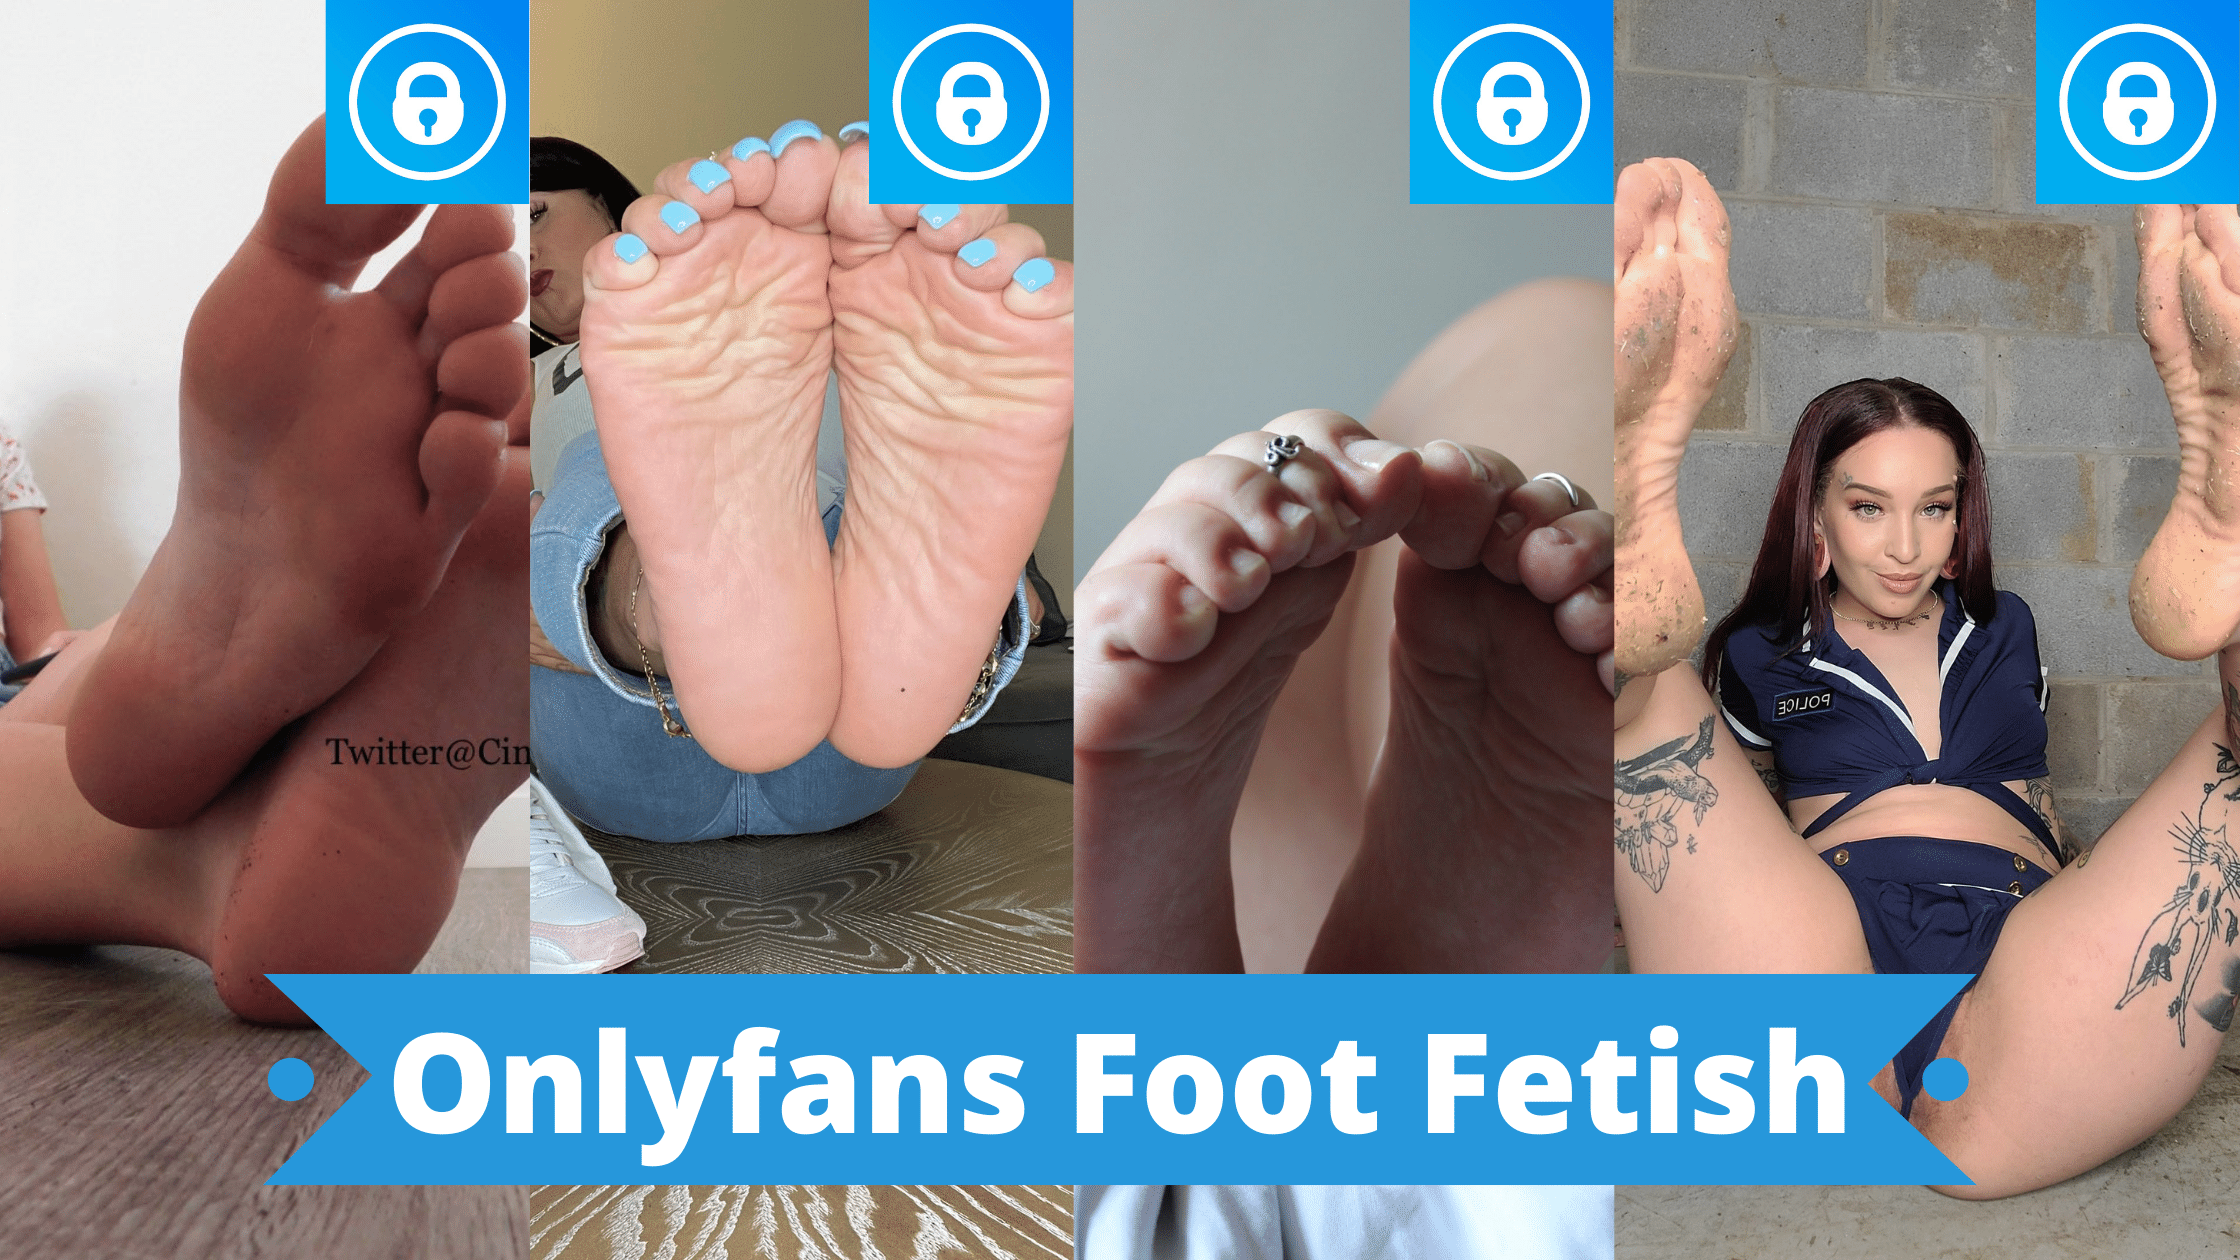 How to make an onlyfans account for feet pics